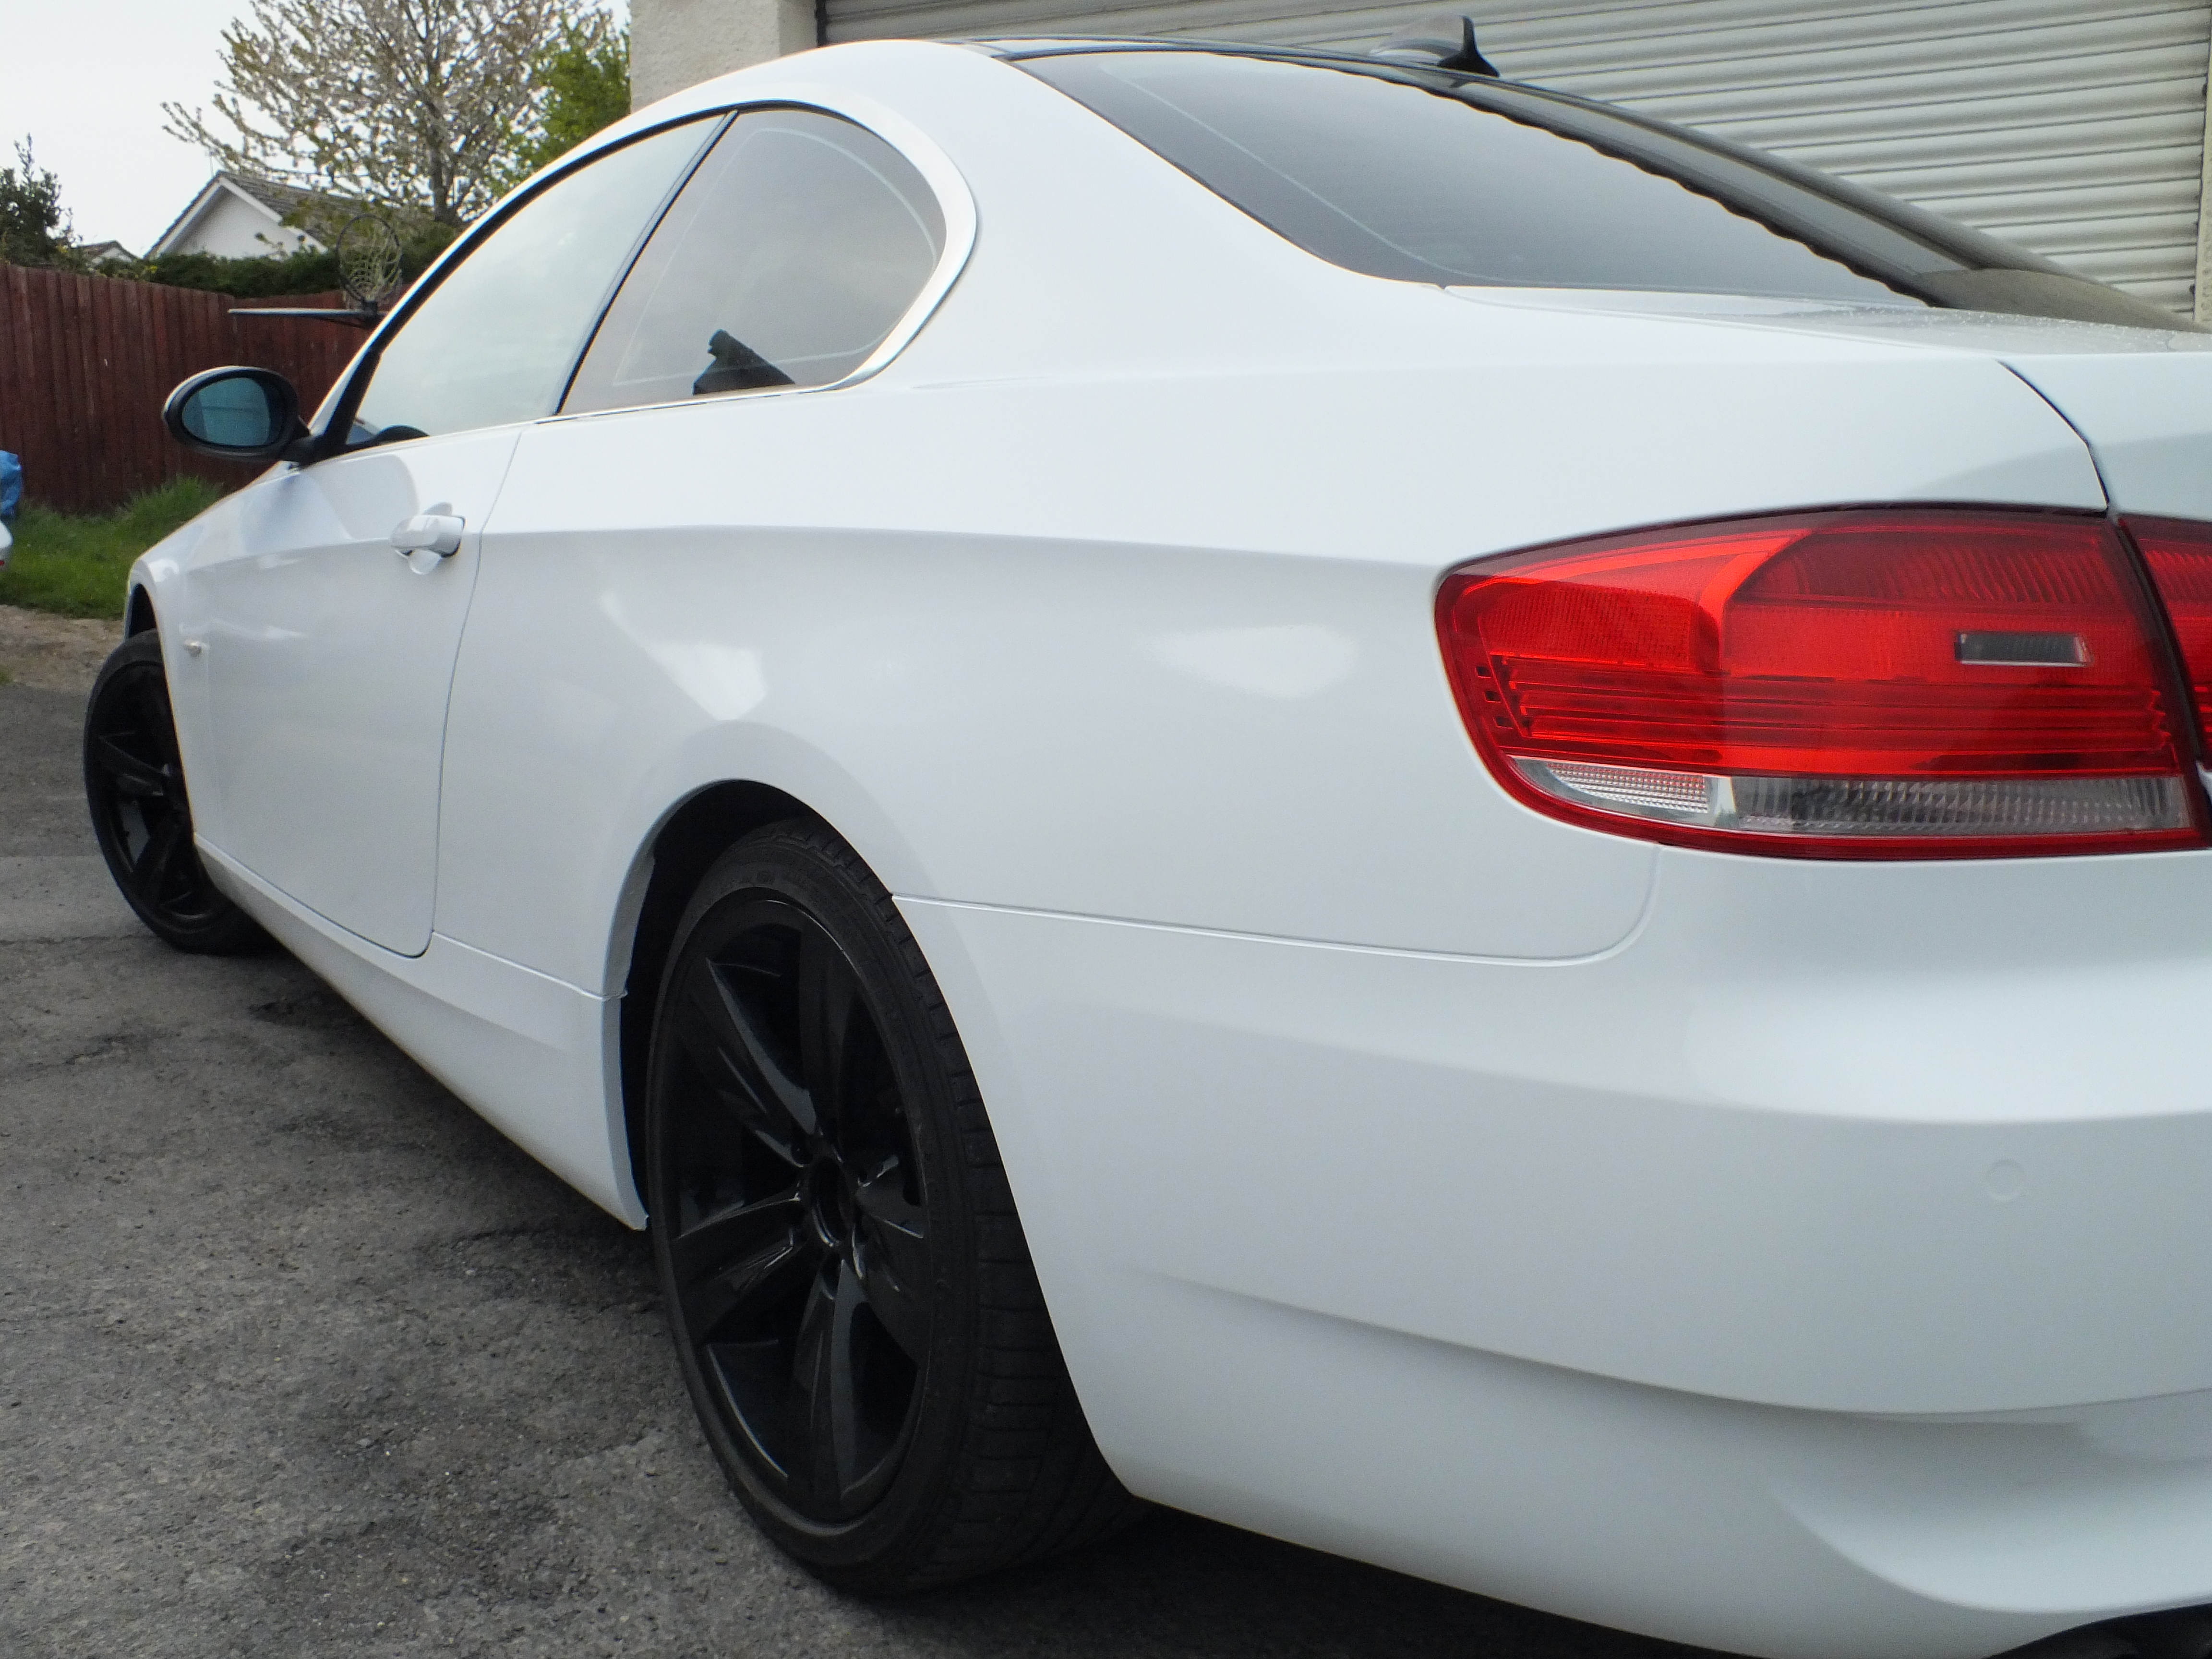 BMW 3 Series saloon in for window tinting and full vehicle wrap. From Graphite grey to white